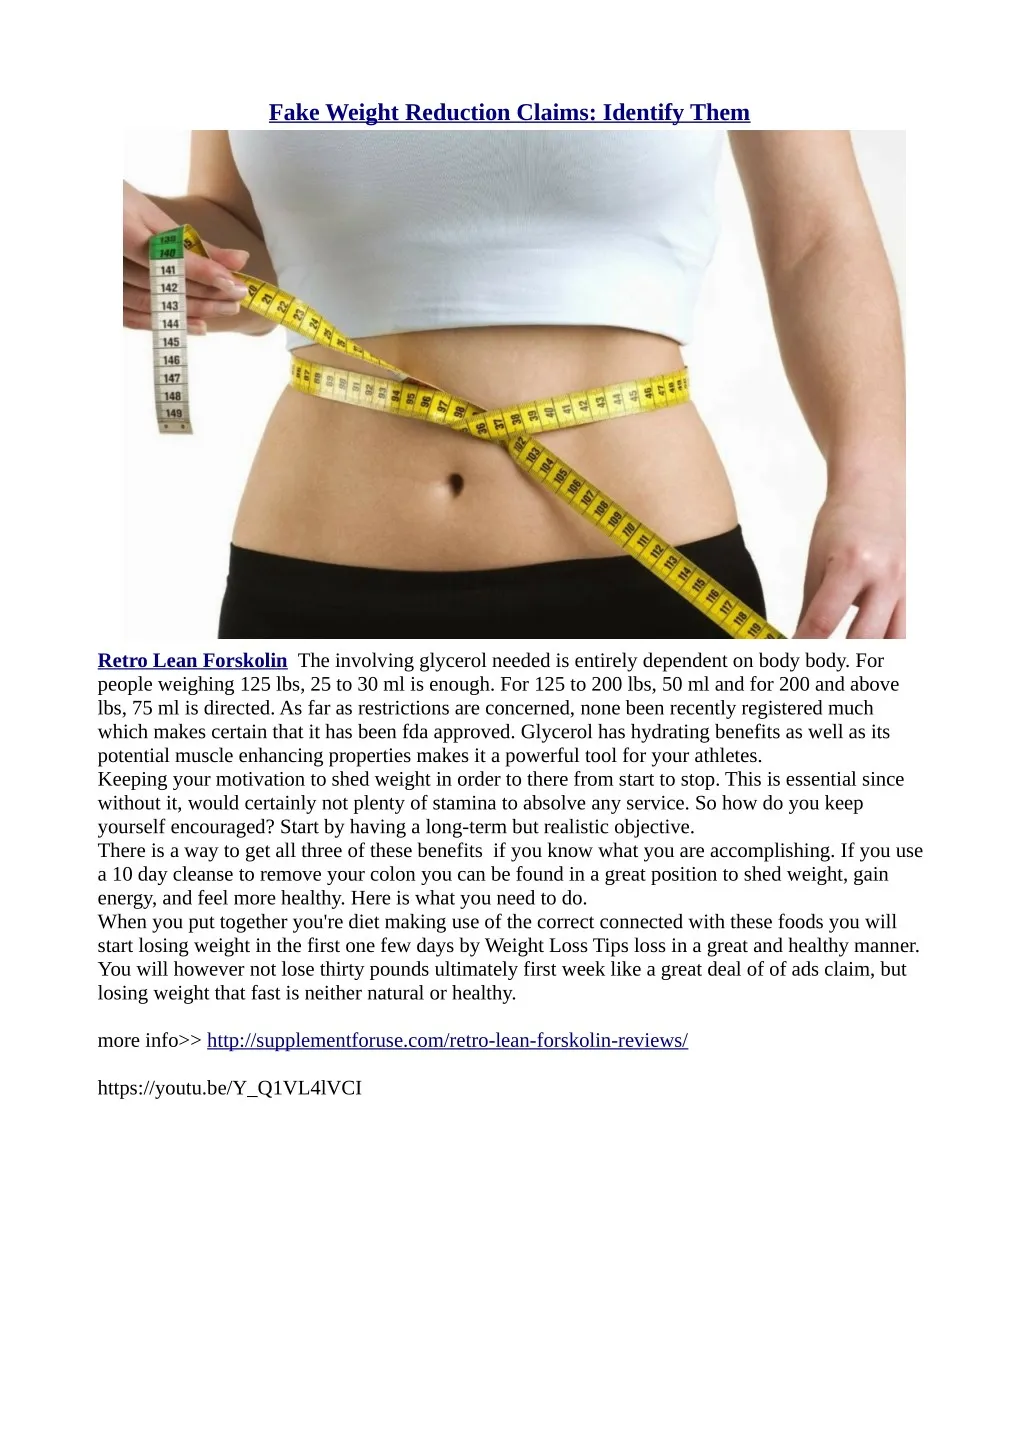 fake weight reduction claims identify them